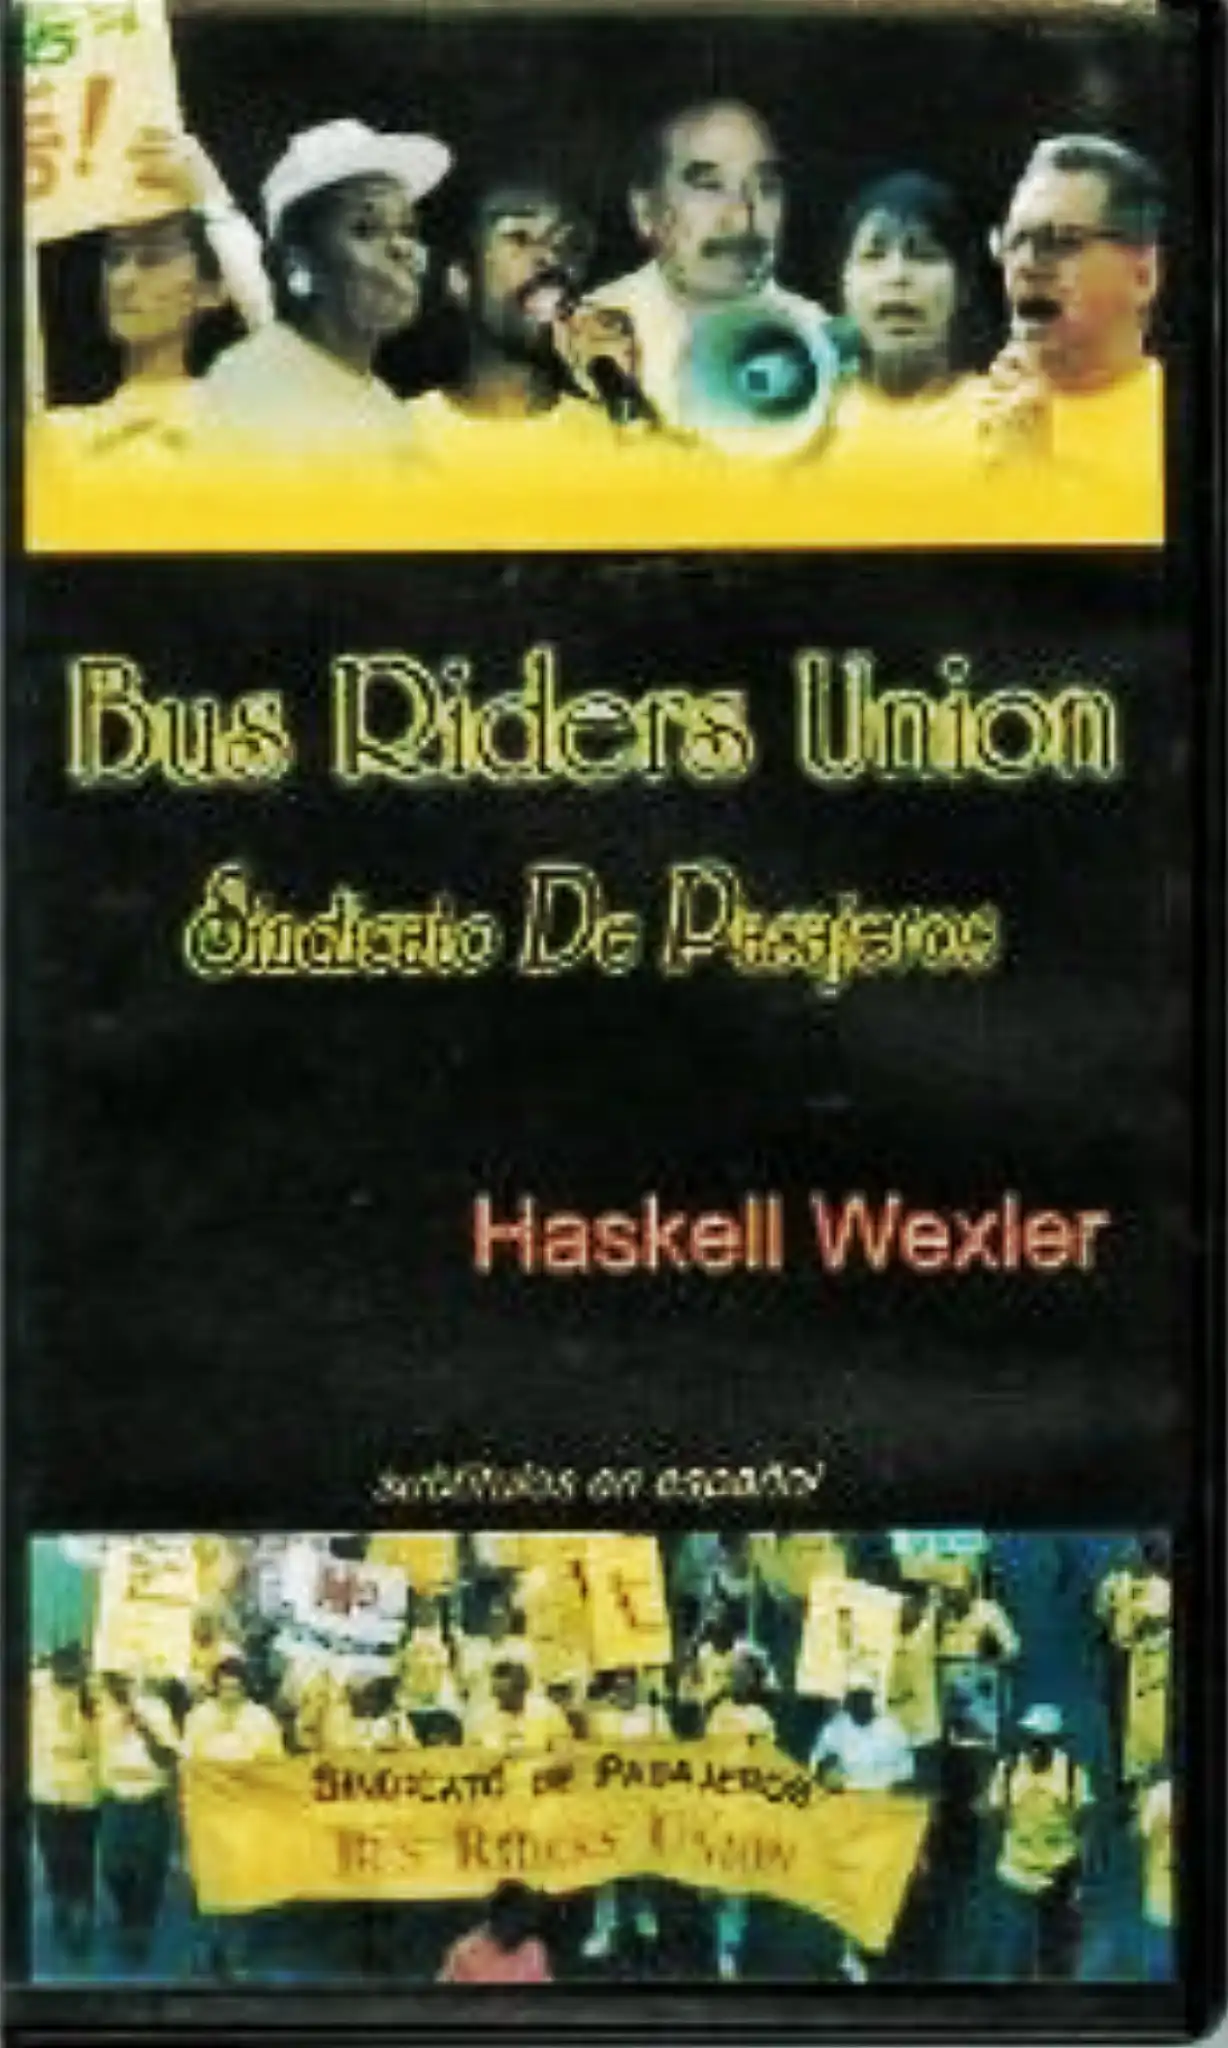 Watch and Download Bus Rider's Union 3